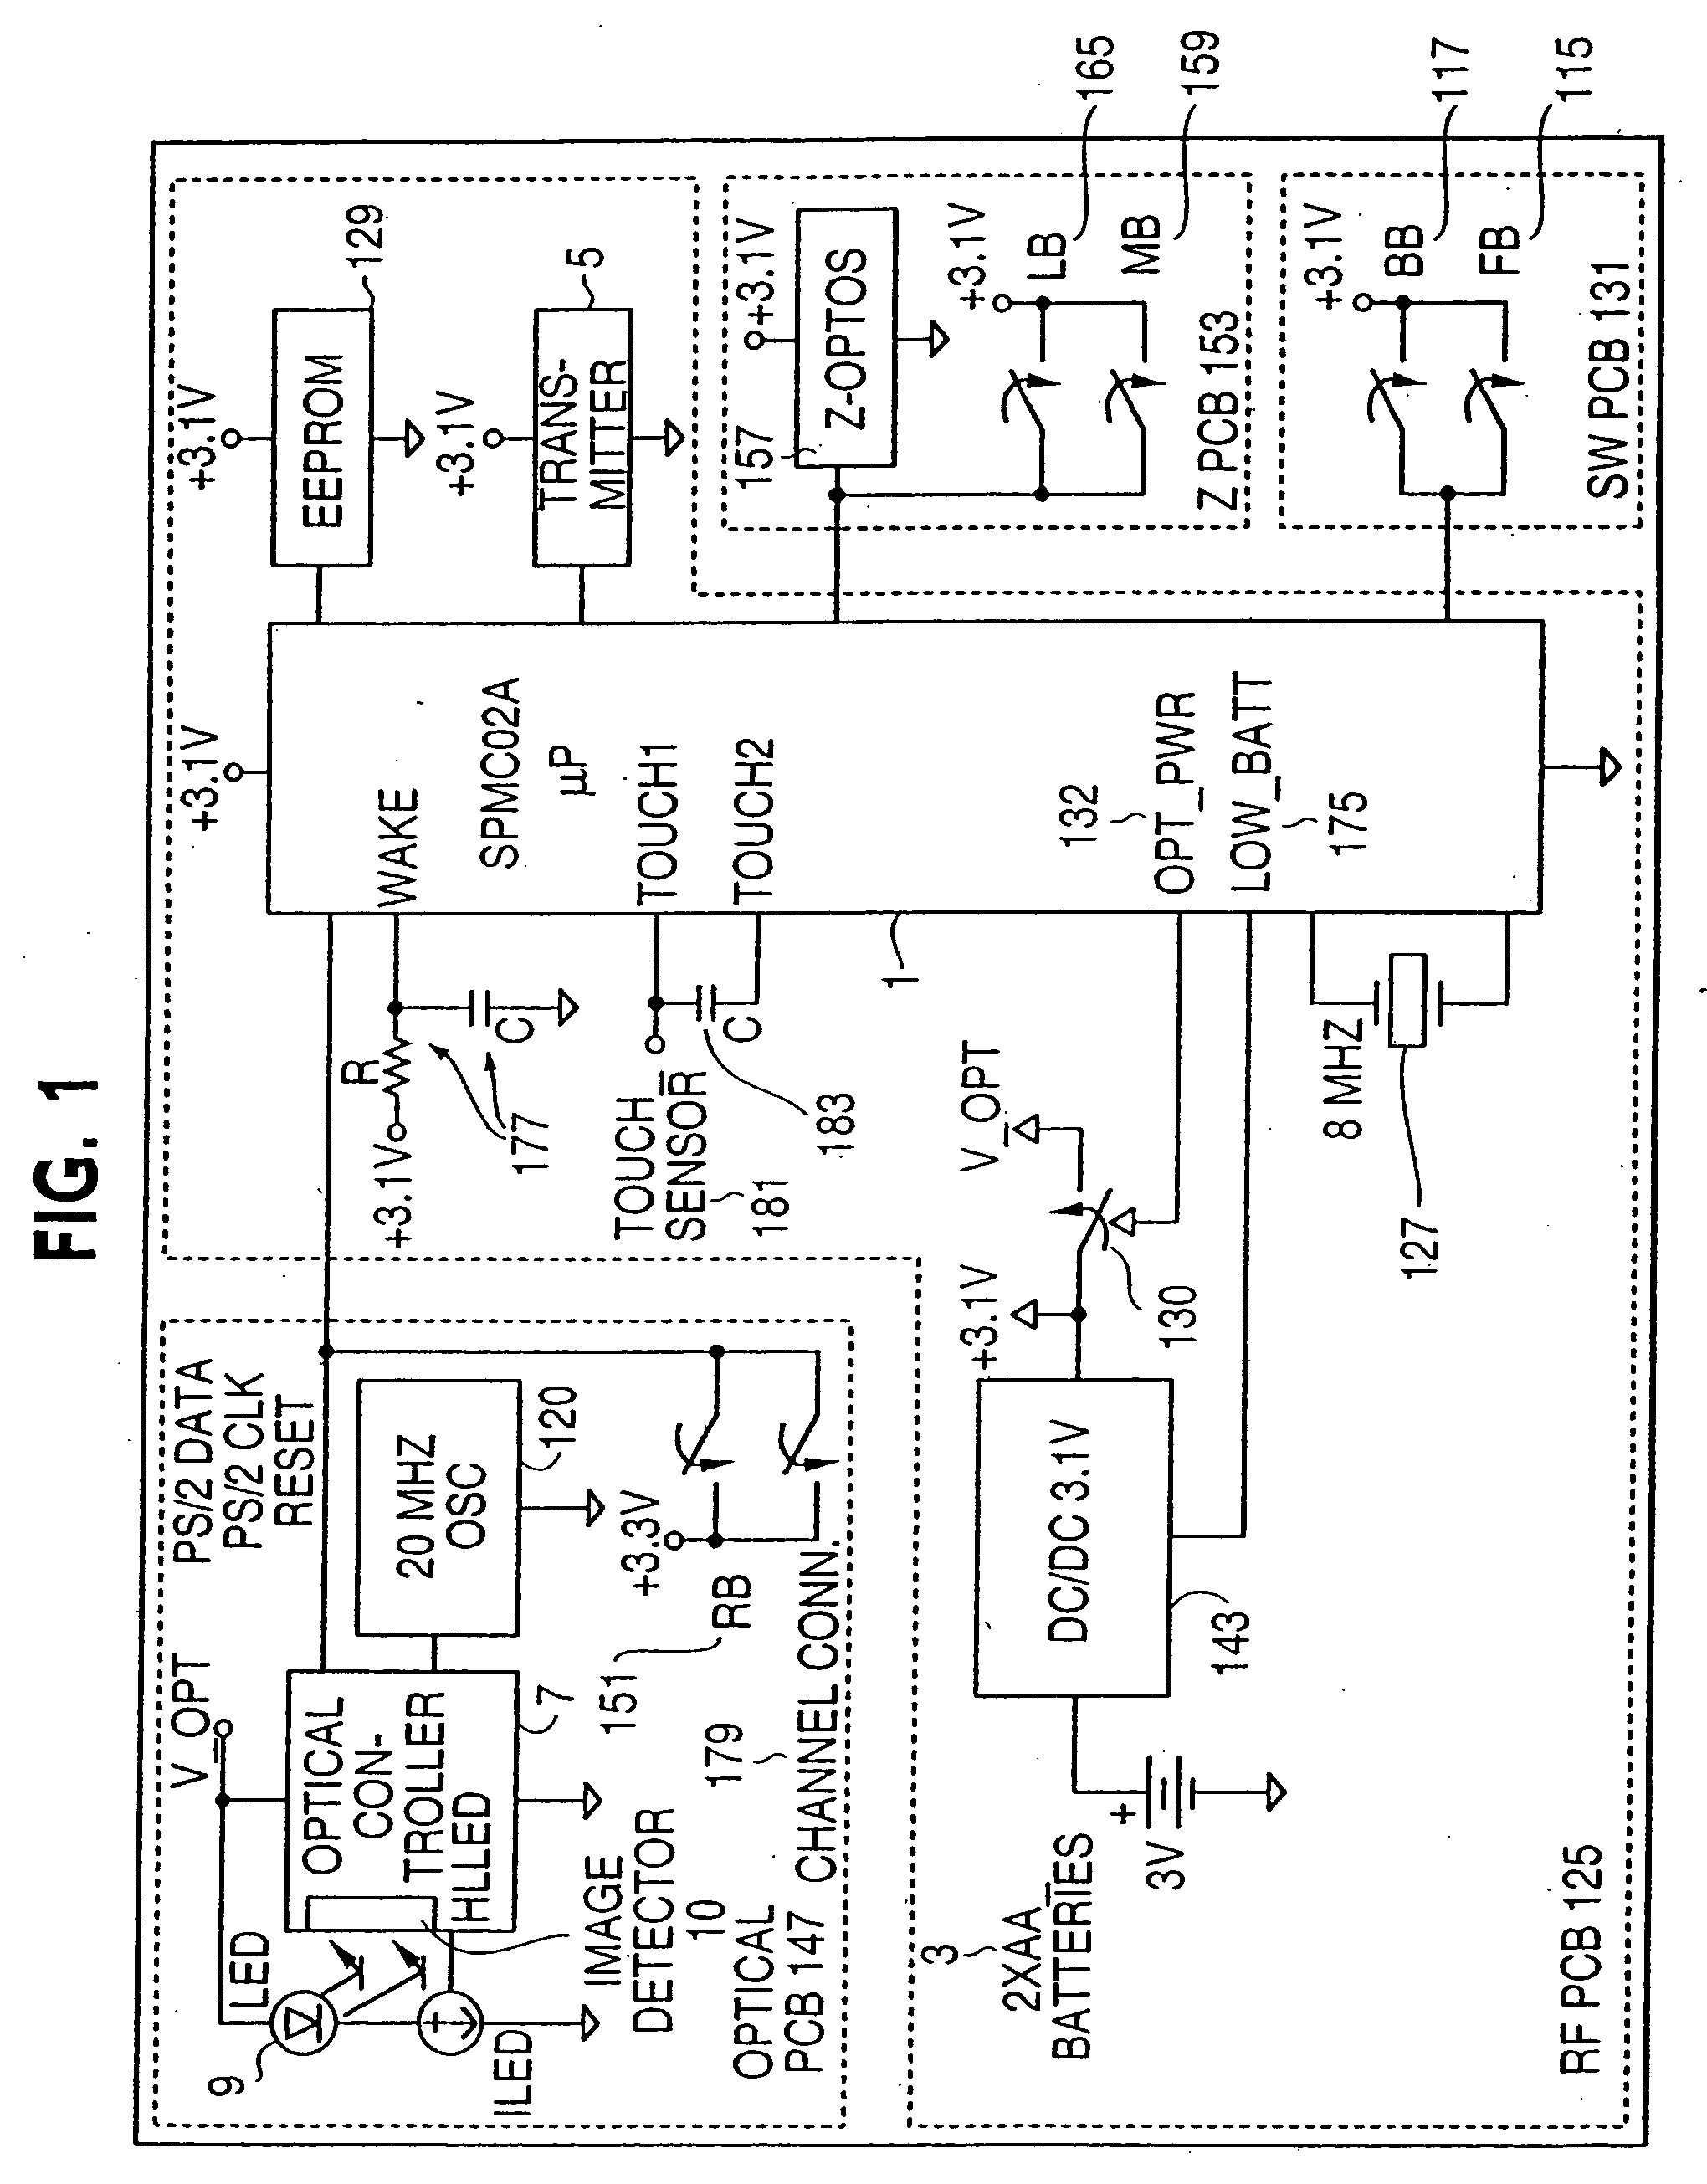 Data input device power management including beacon state